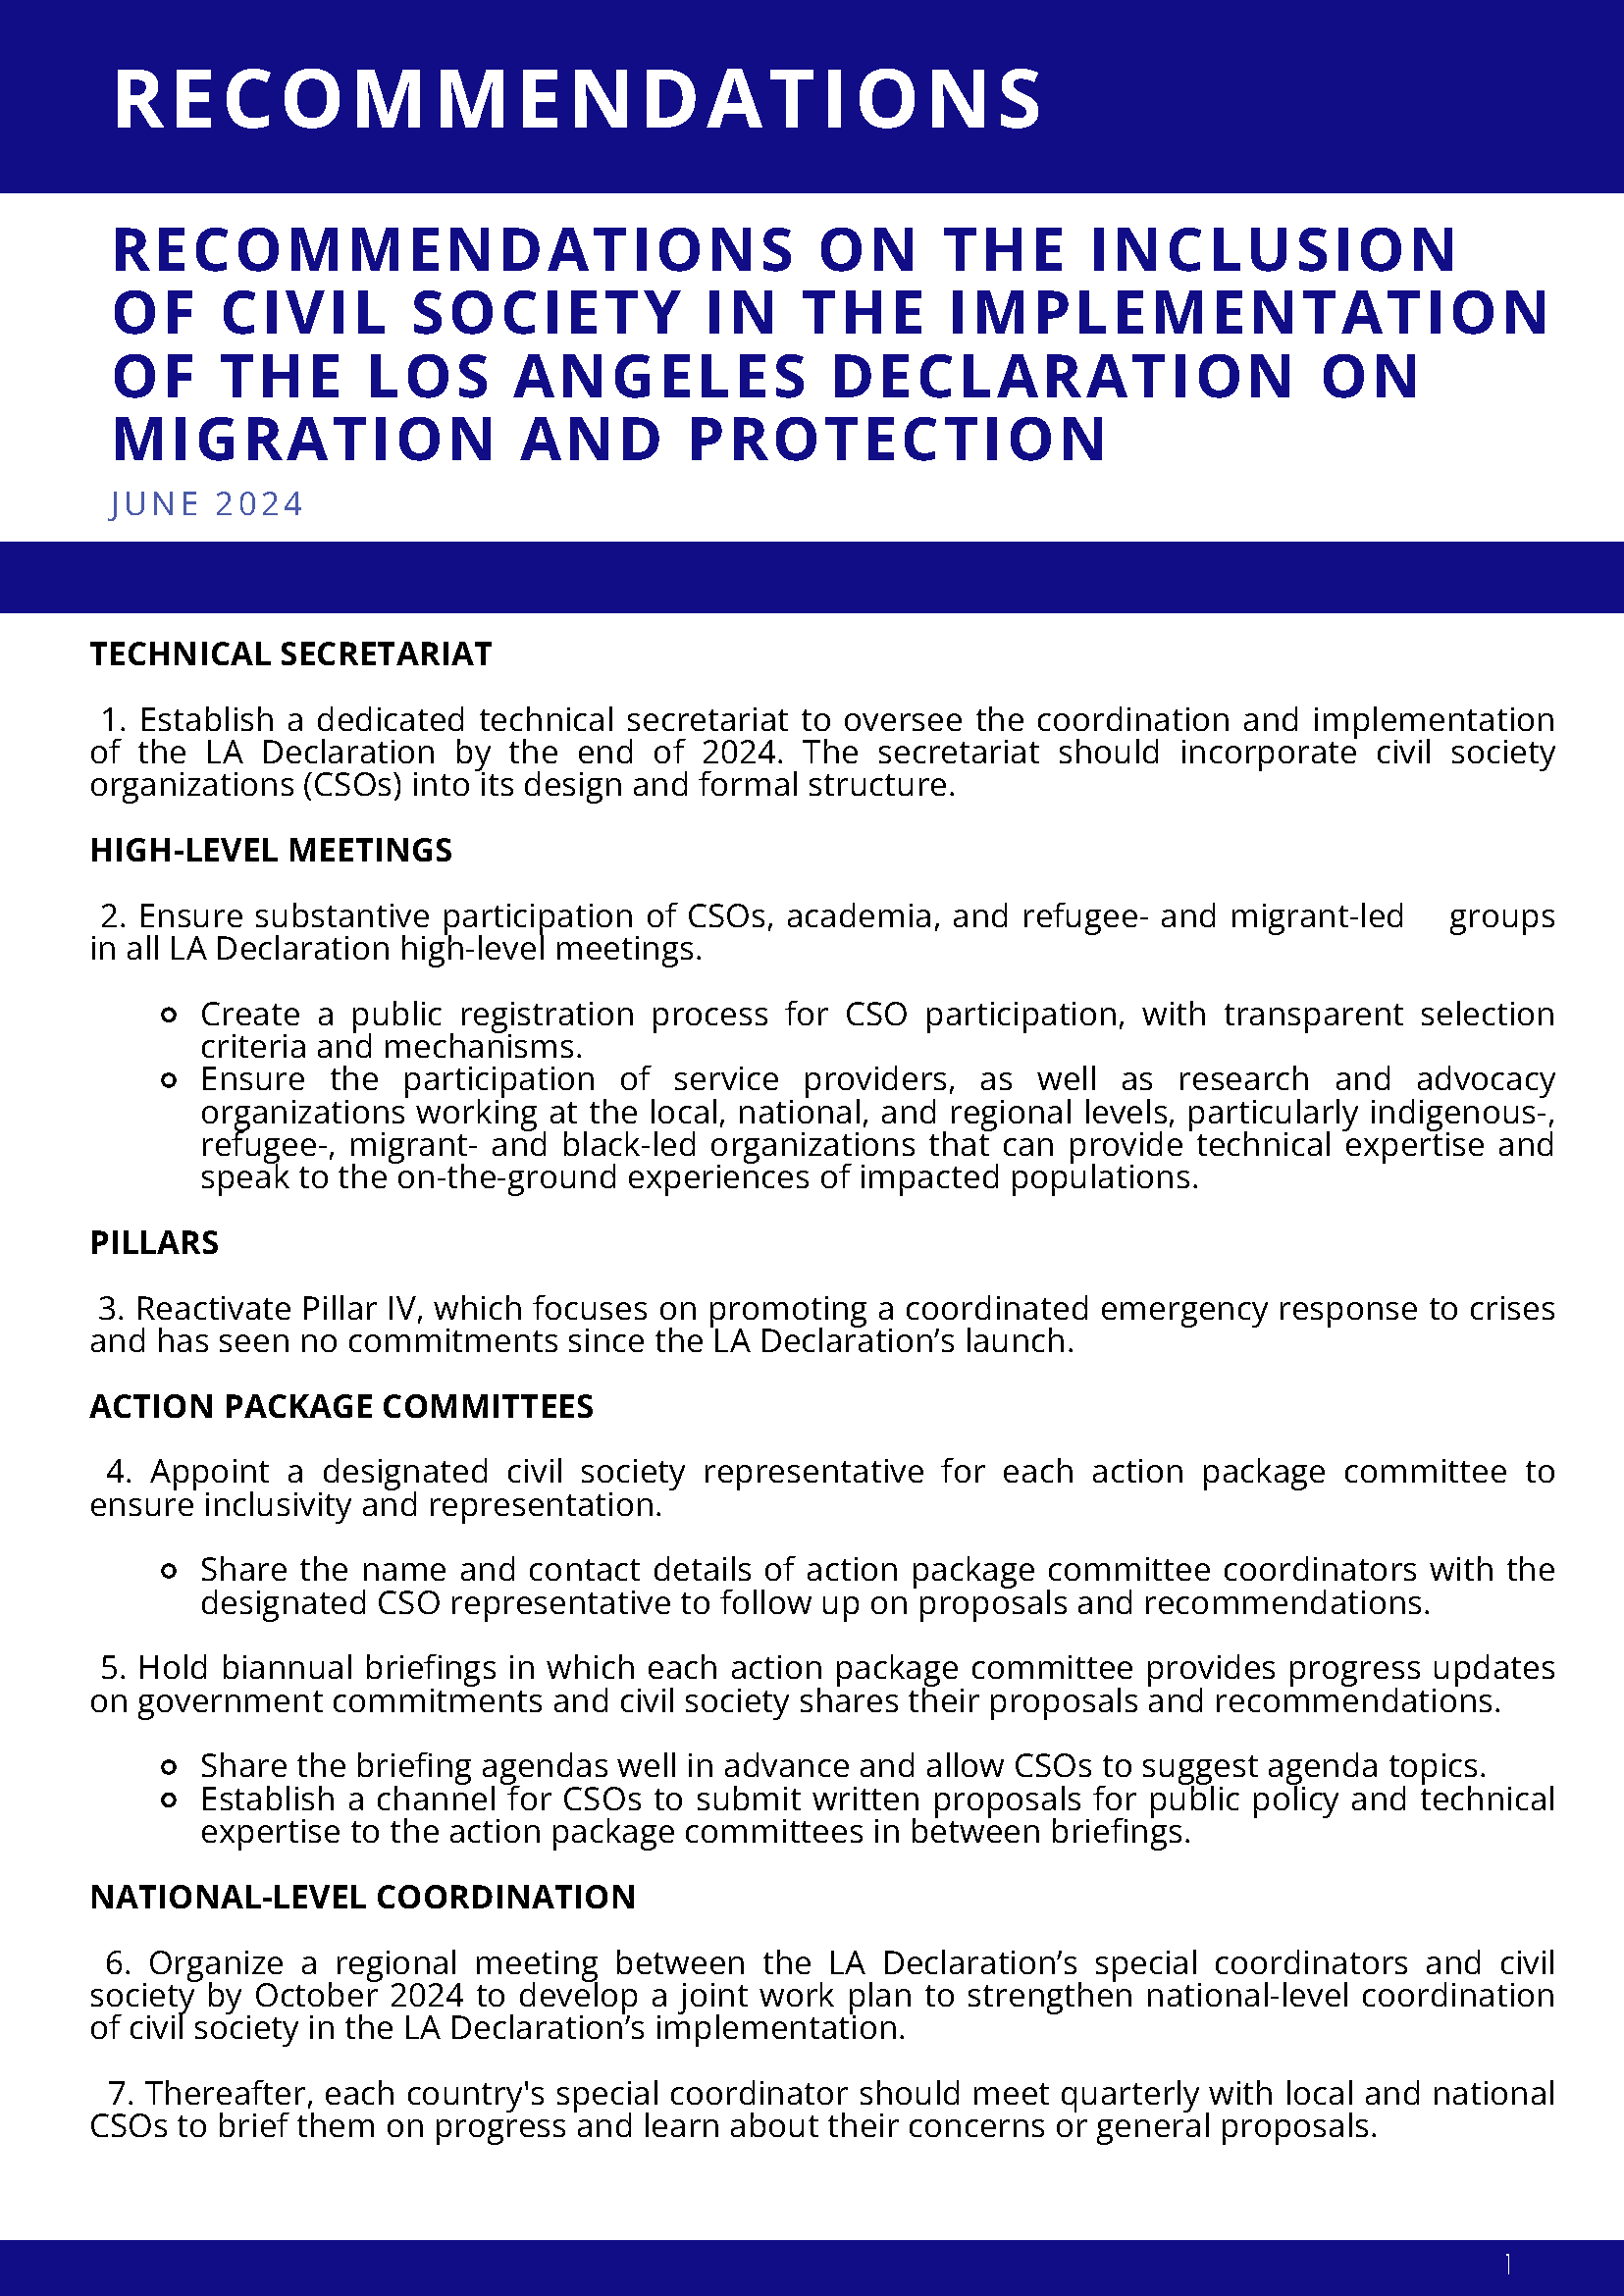 The Women&#8217;s Refugee Commission Signs Onto List of Recommendations for the Los Angeles Declaration on Migration and Protection